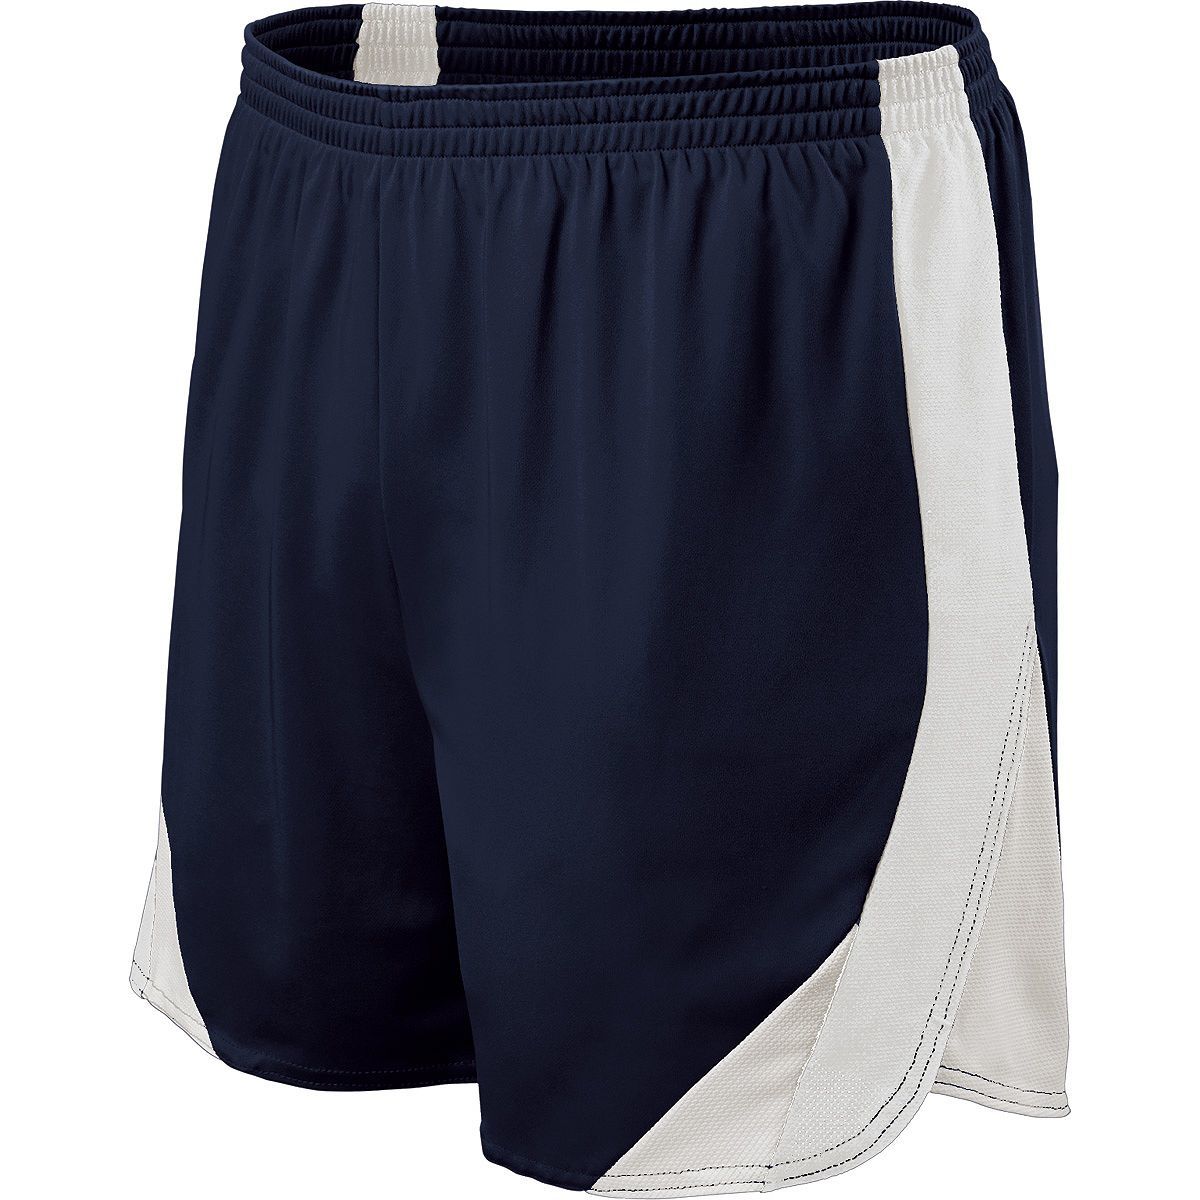 Holloway Approach Shorts in True Navy/White/White  -Part of the Adult, Adult-Shorts, Track-Field, Holloway product lines at KanaleyCreations.com